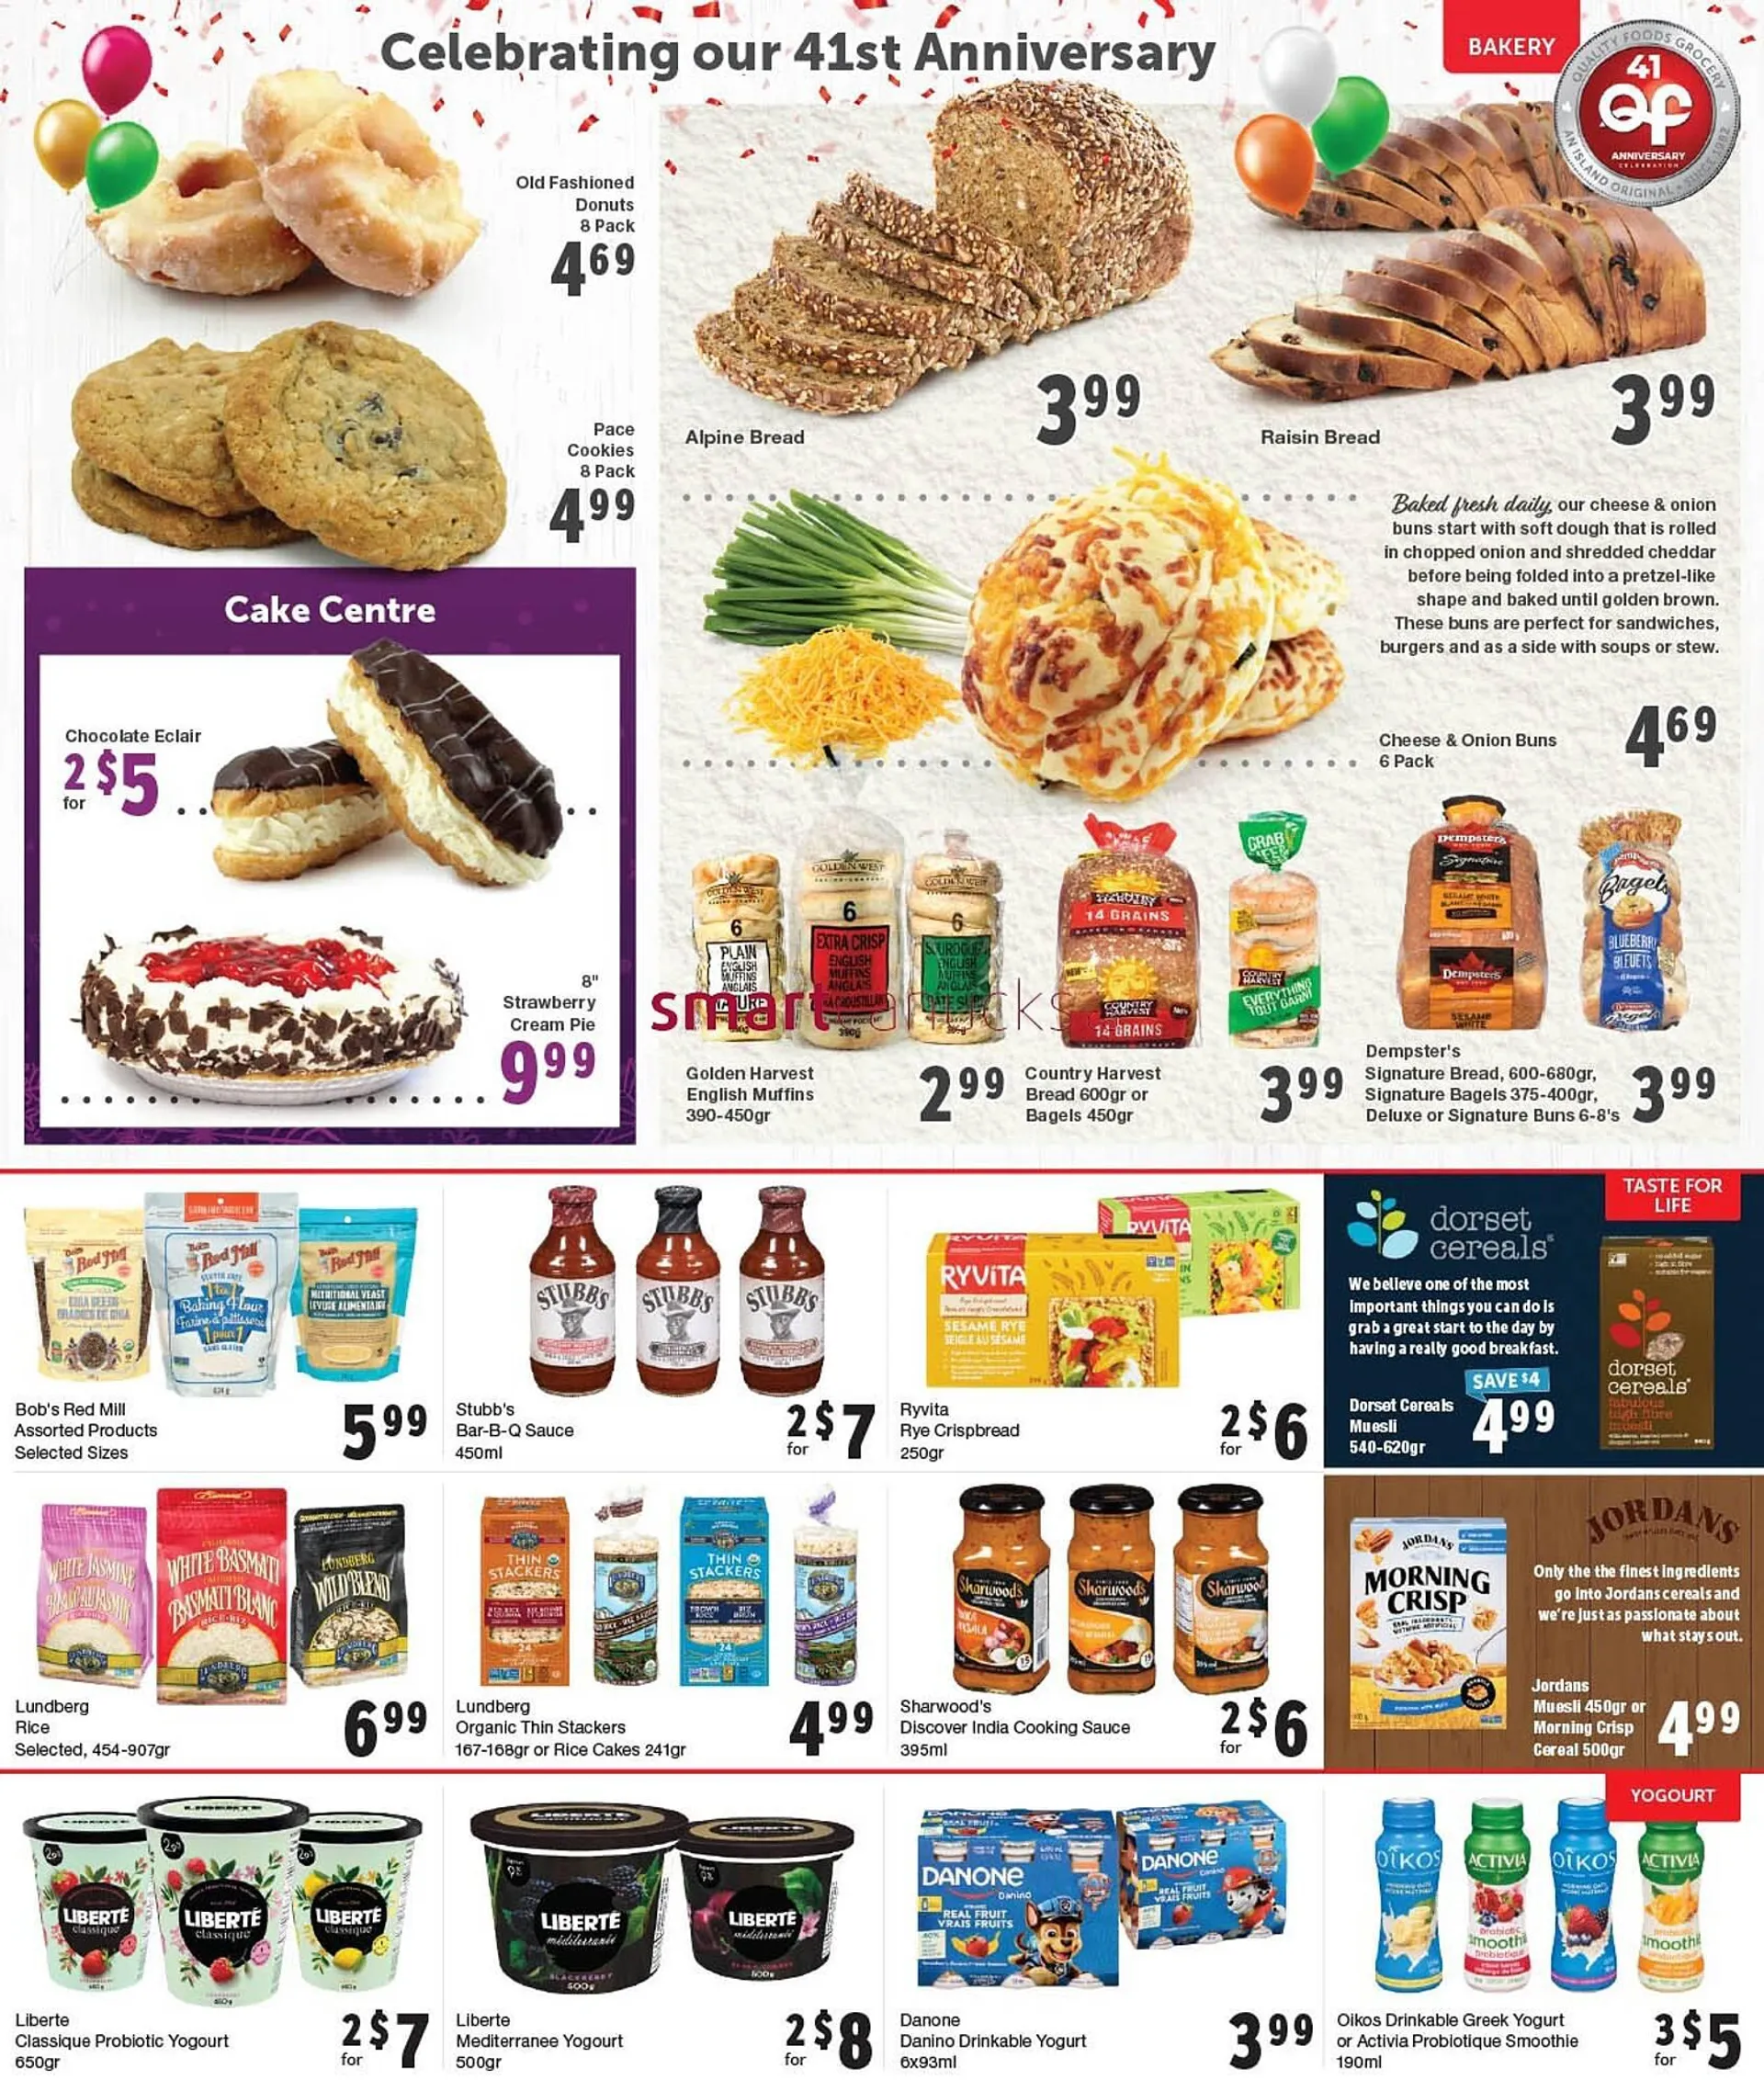 Quality Foods flyer - 8